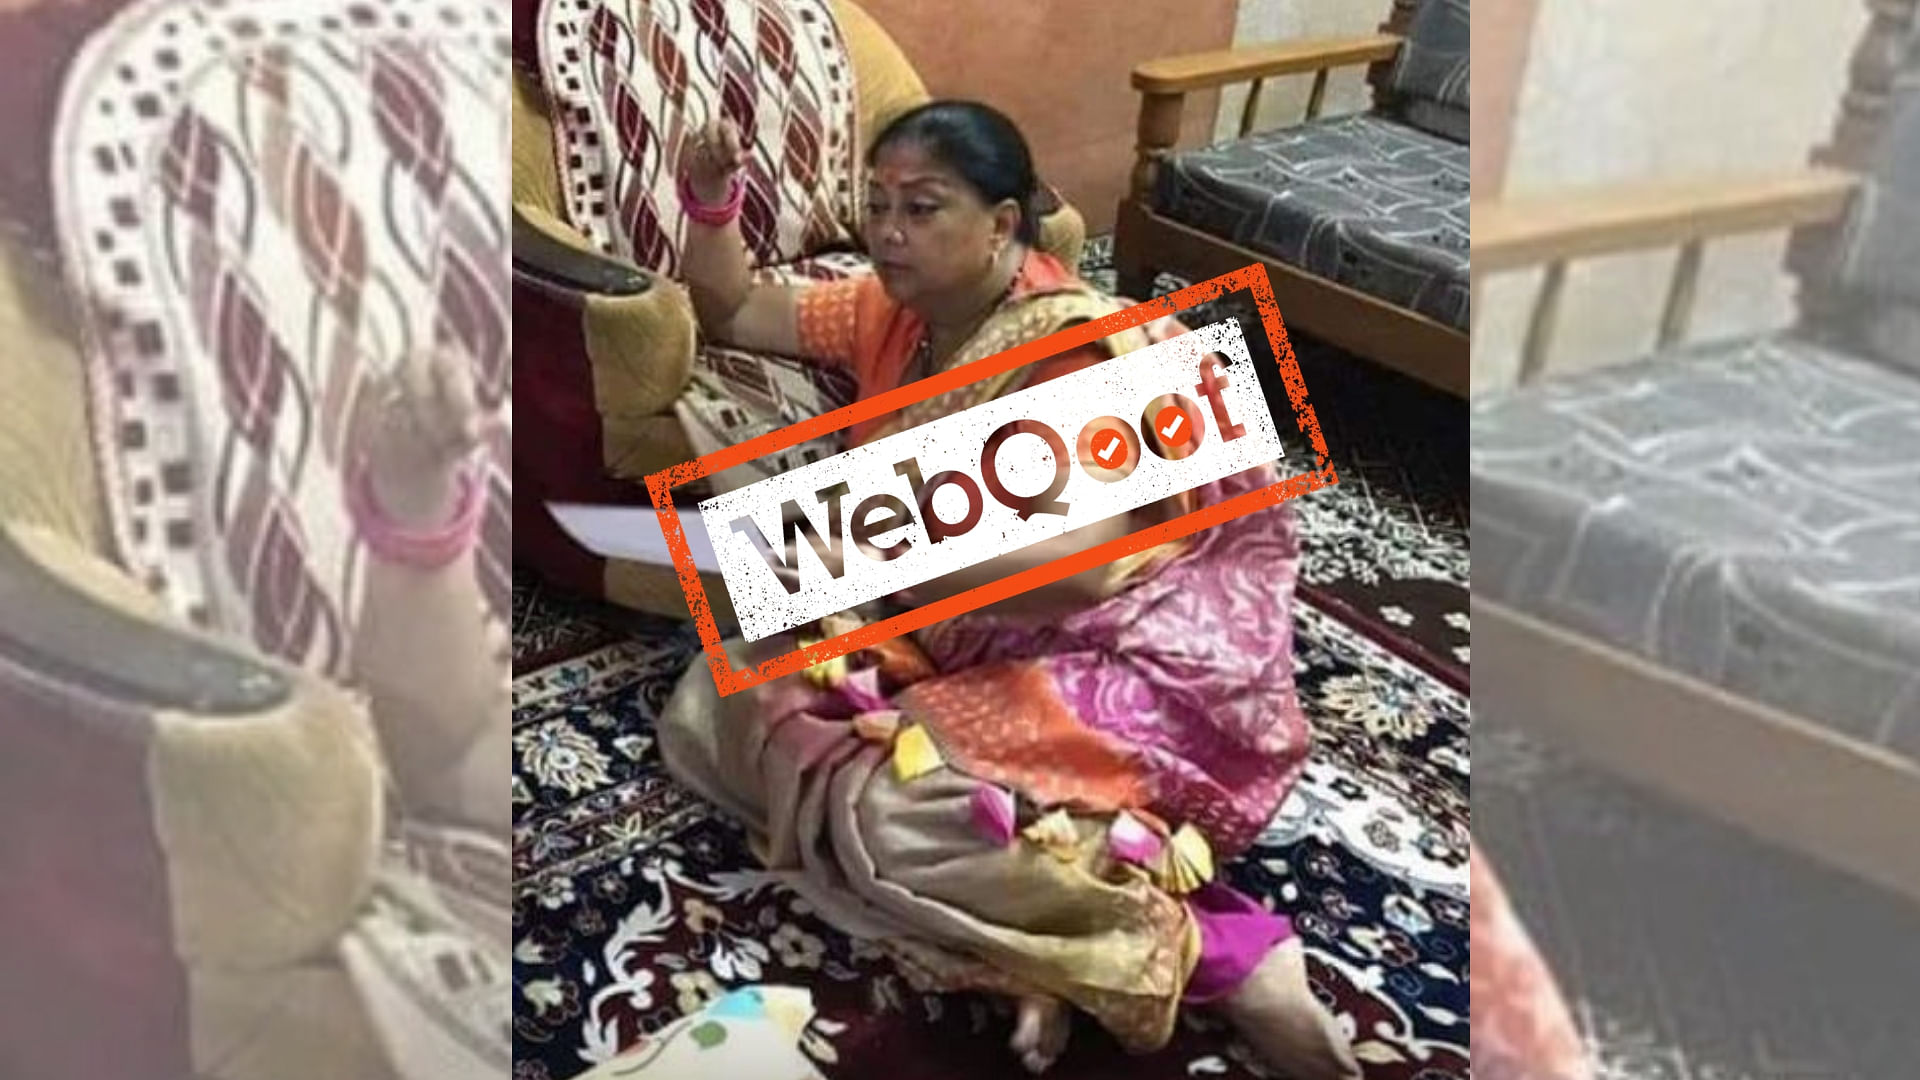 A photo of Rajasthan Chief Minister Vasundhara Raje is going viral for all the wrong reasons.